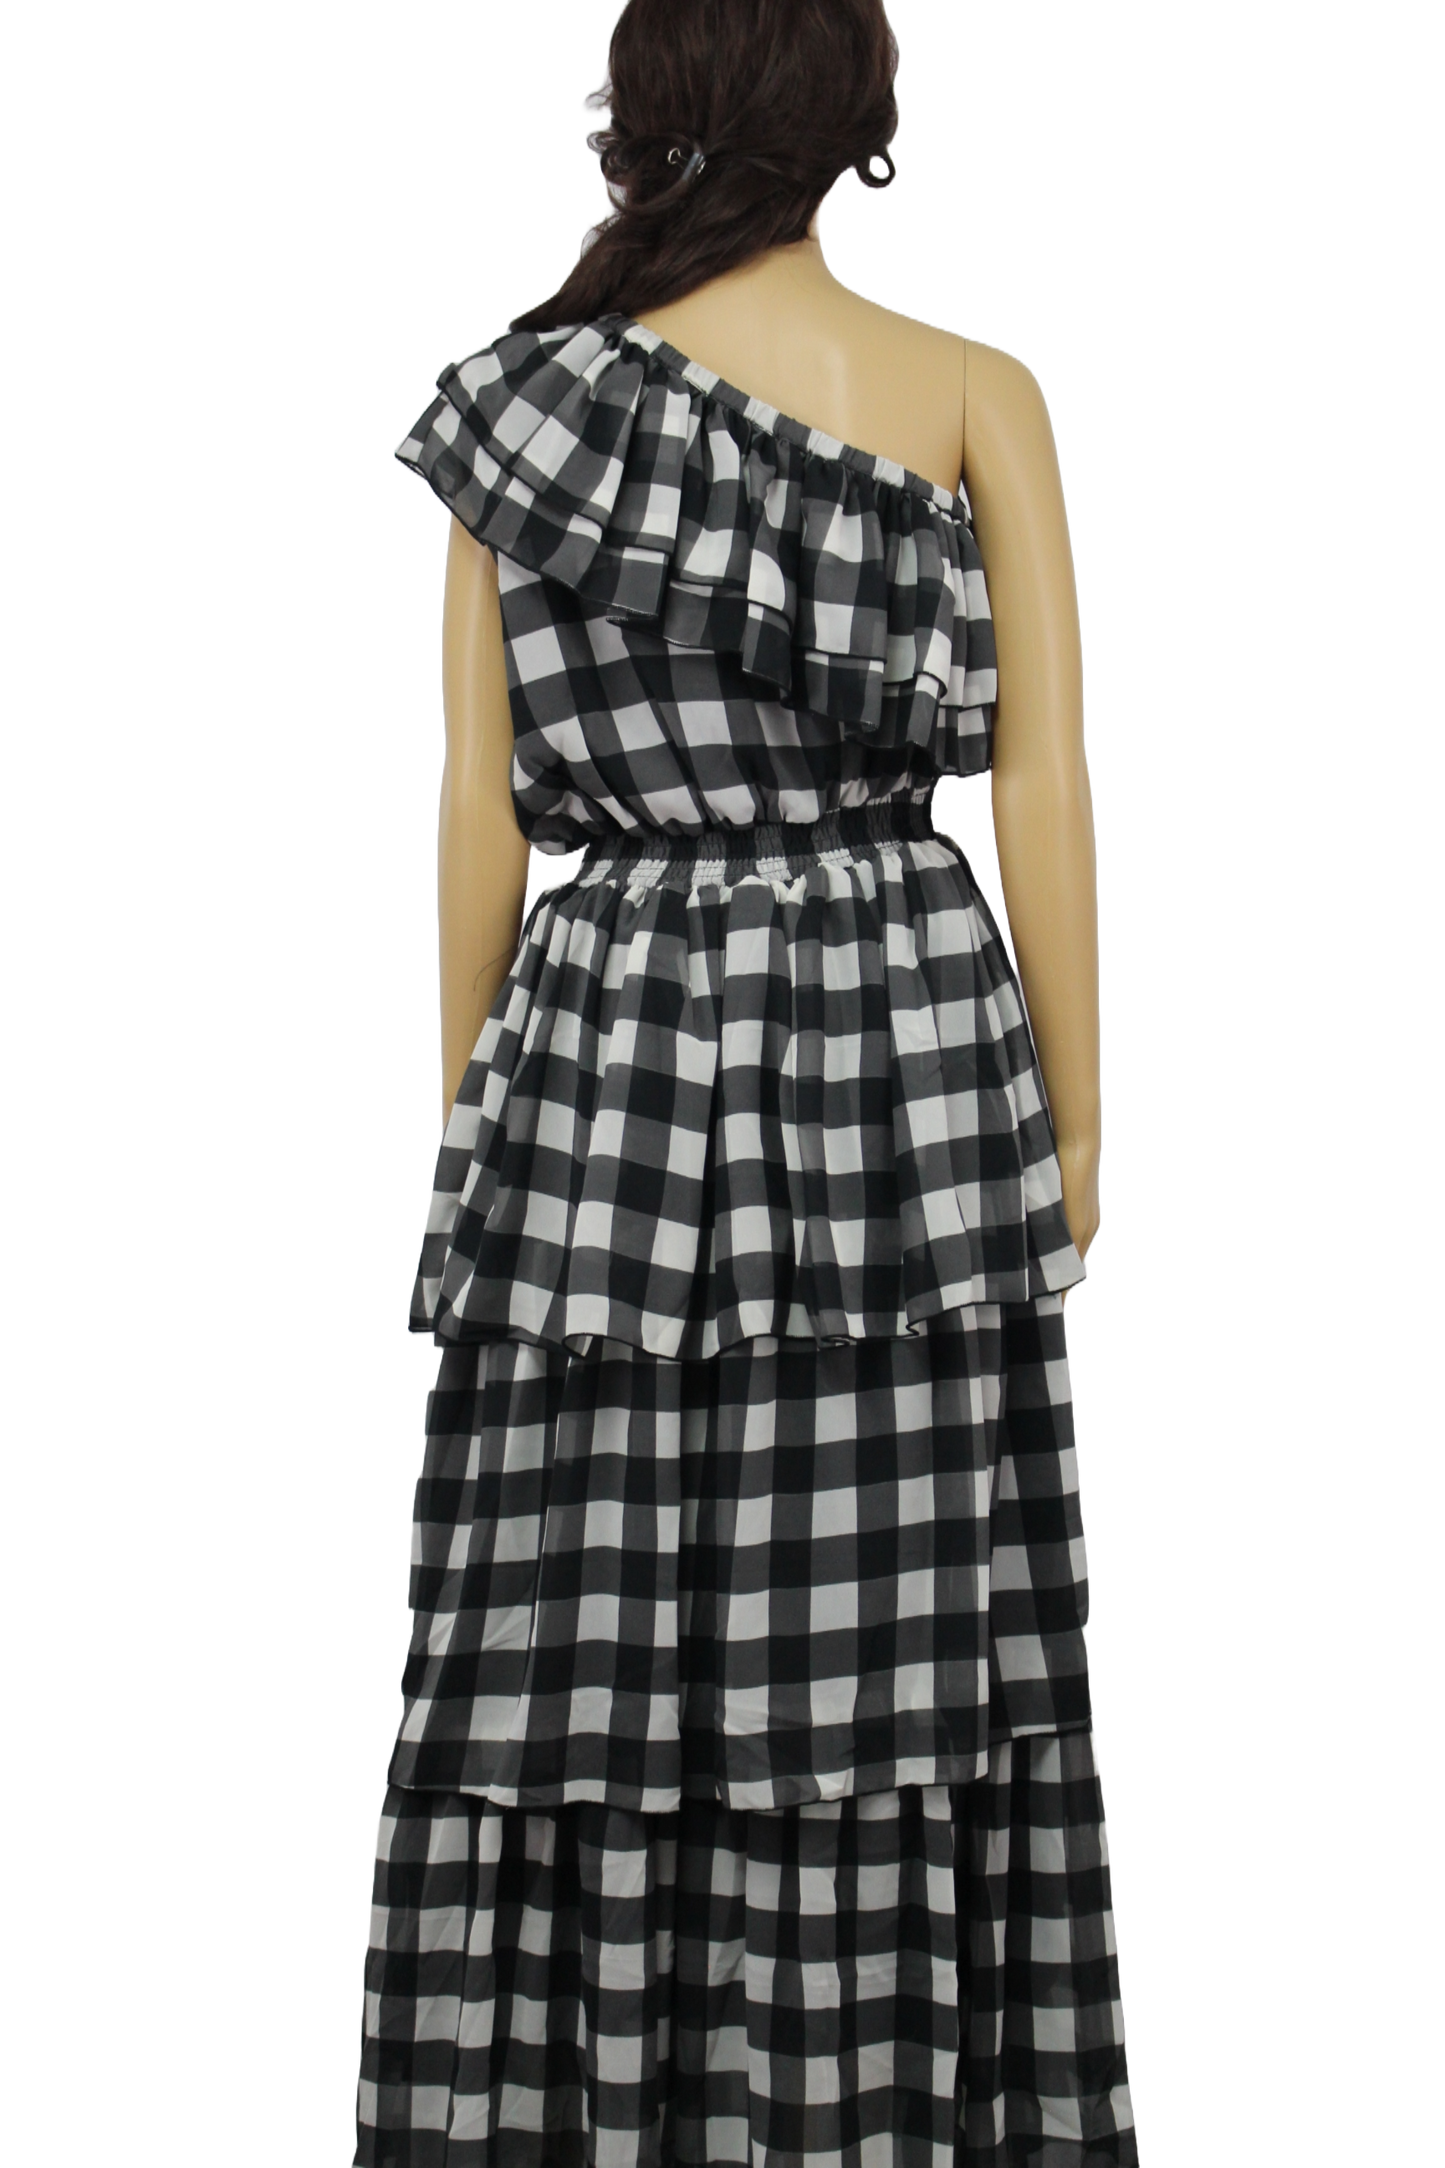 Printed Plaid One Shoulder Dress (One Size - up to Medium)